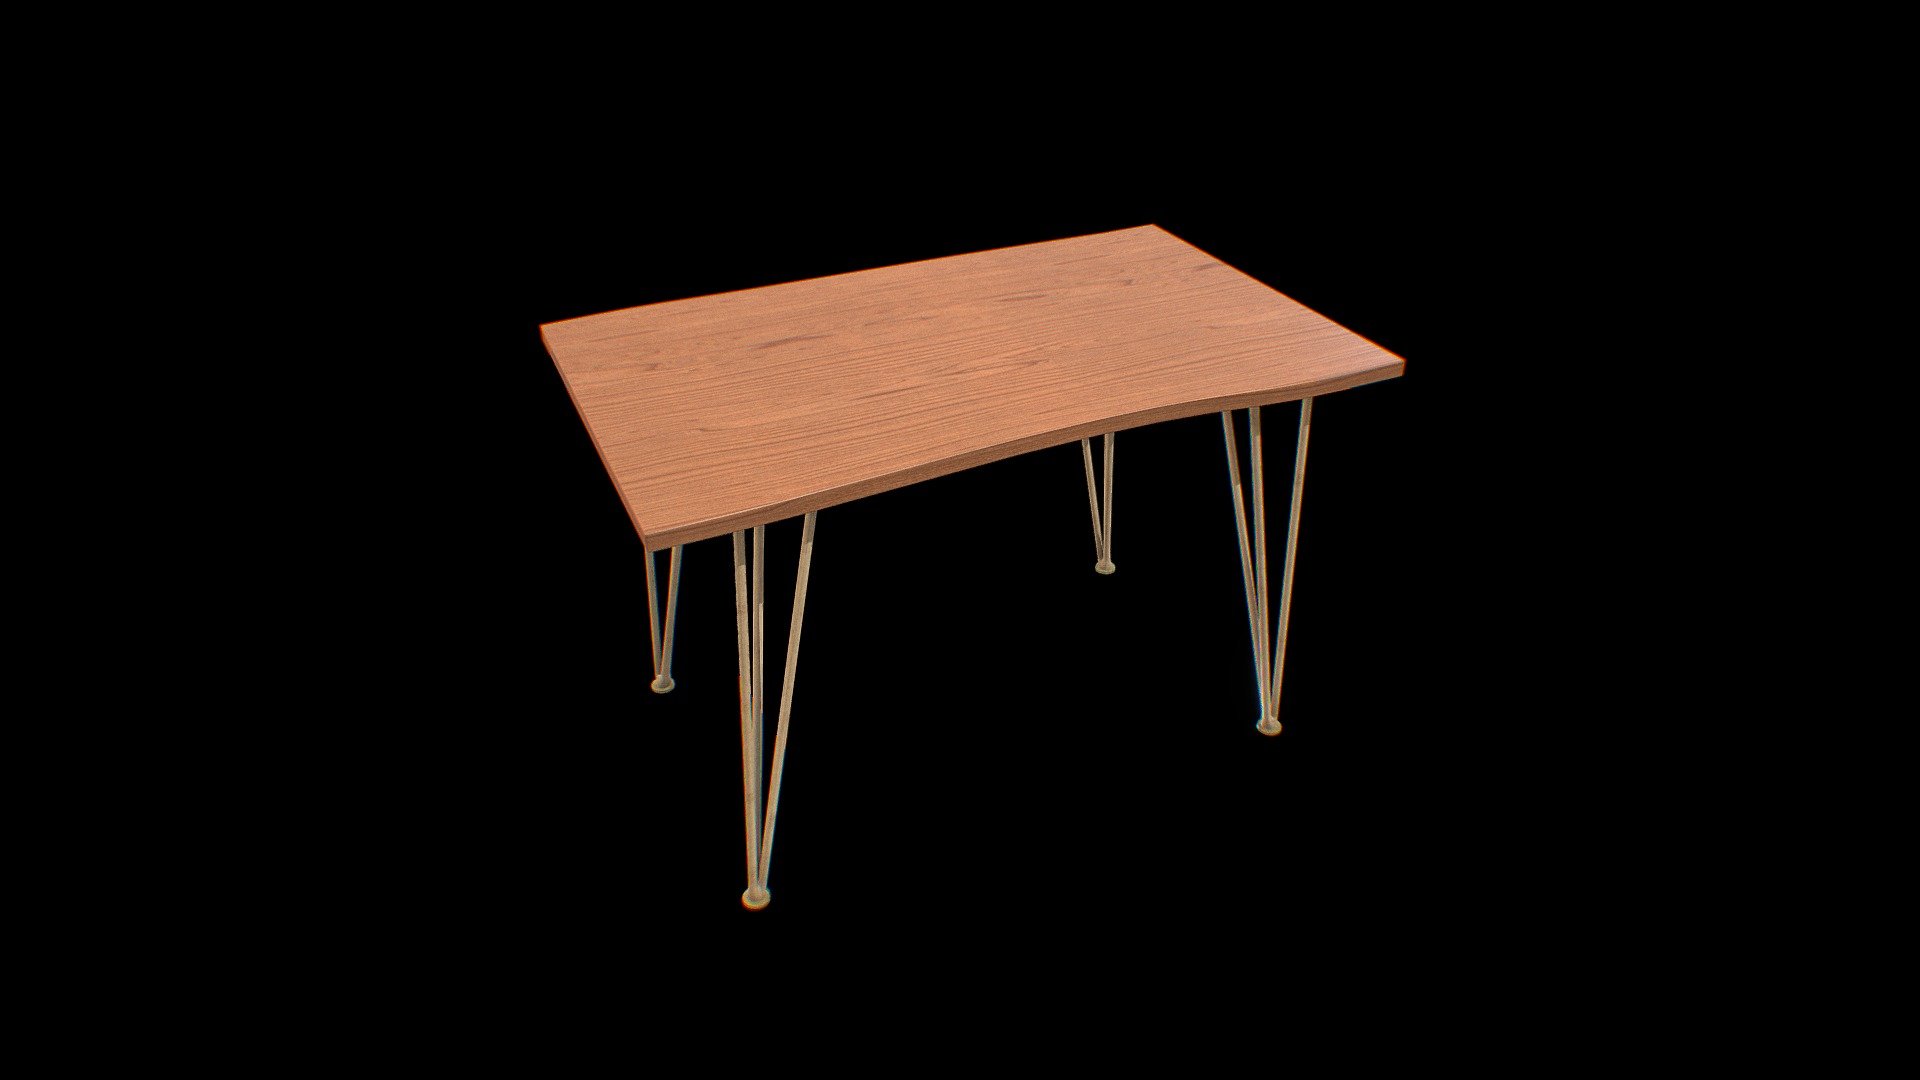 Mohagany Dining Room Table 48 Inches Wifde